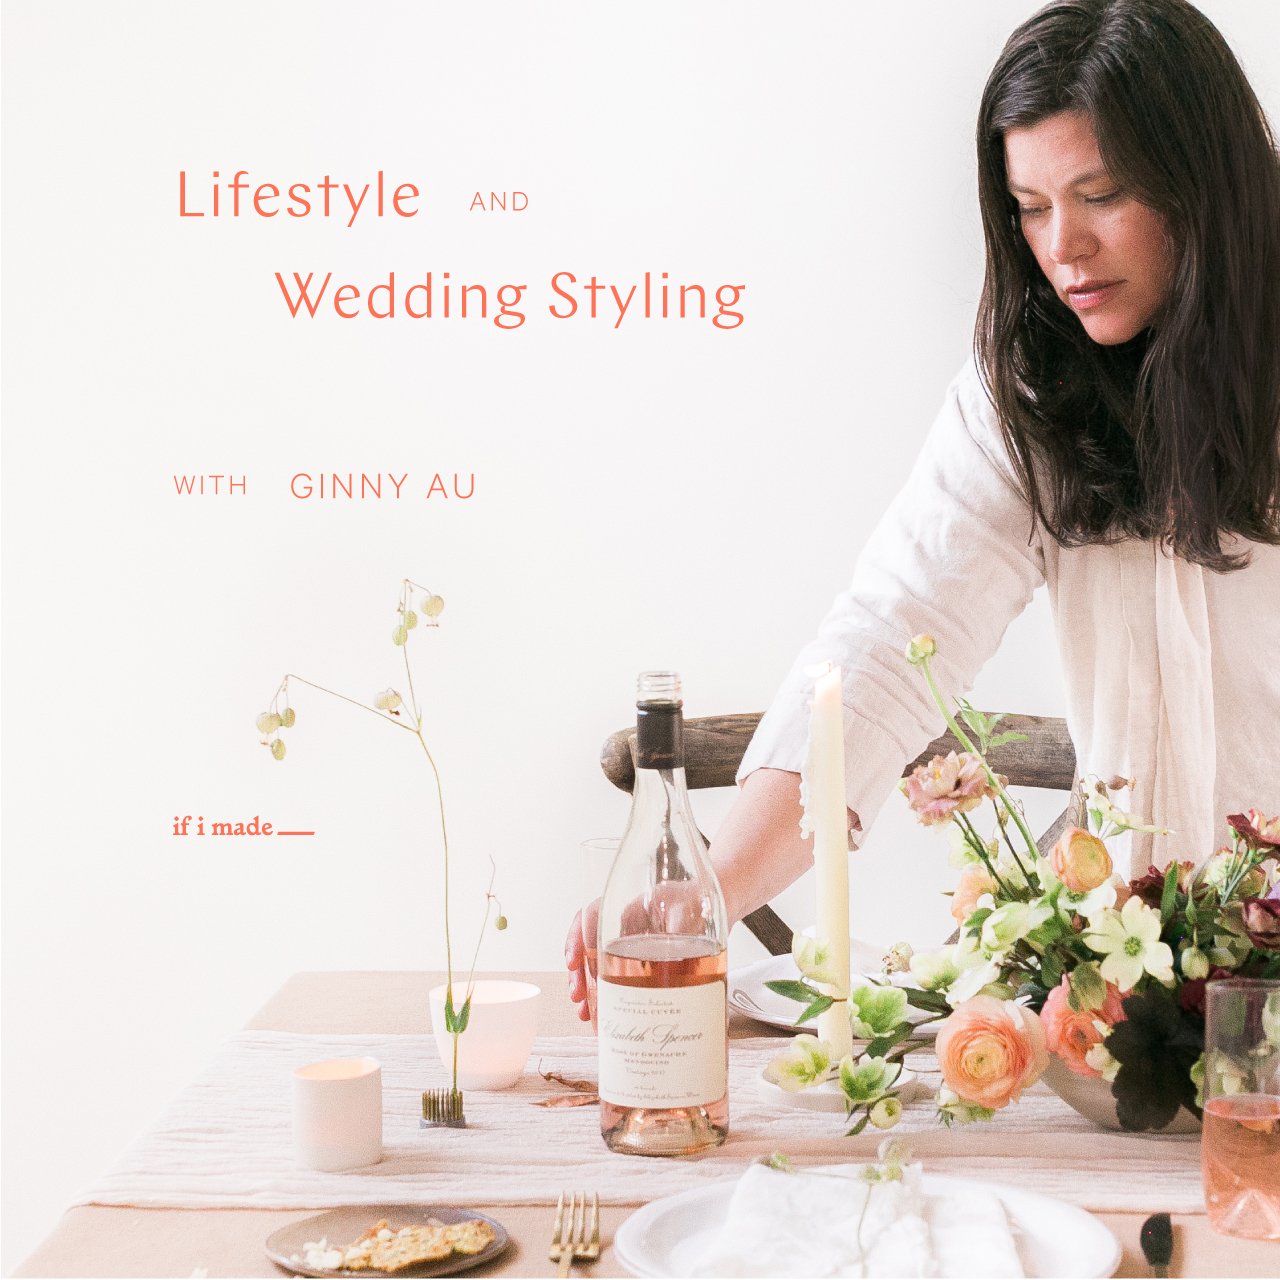 Lifestyle and Wedding Styling with Ginny Au (SPP) - 9 payments of $99